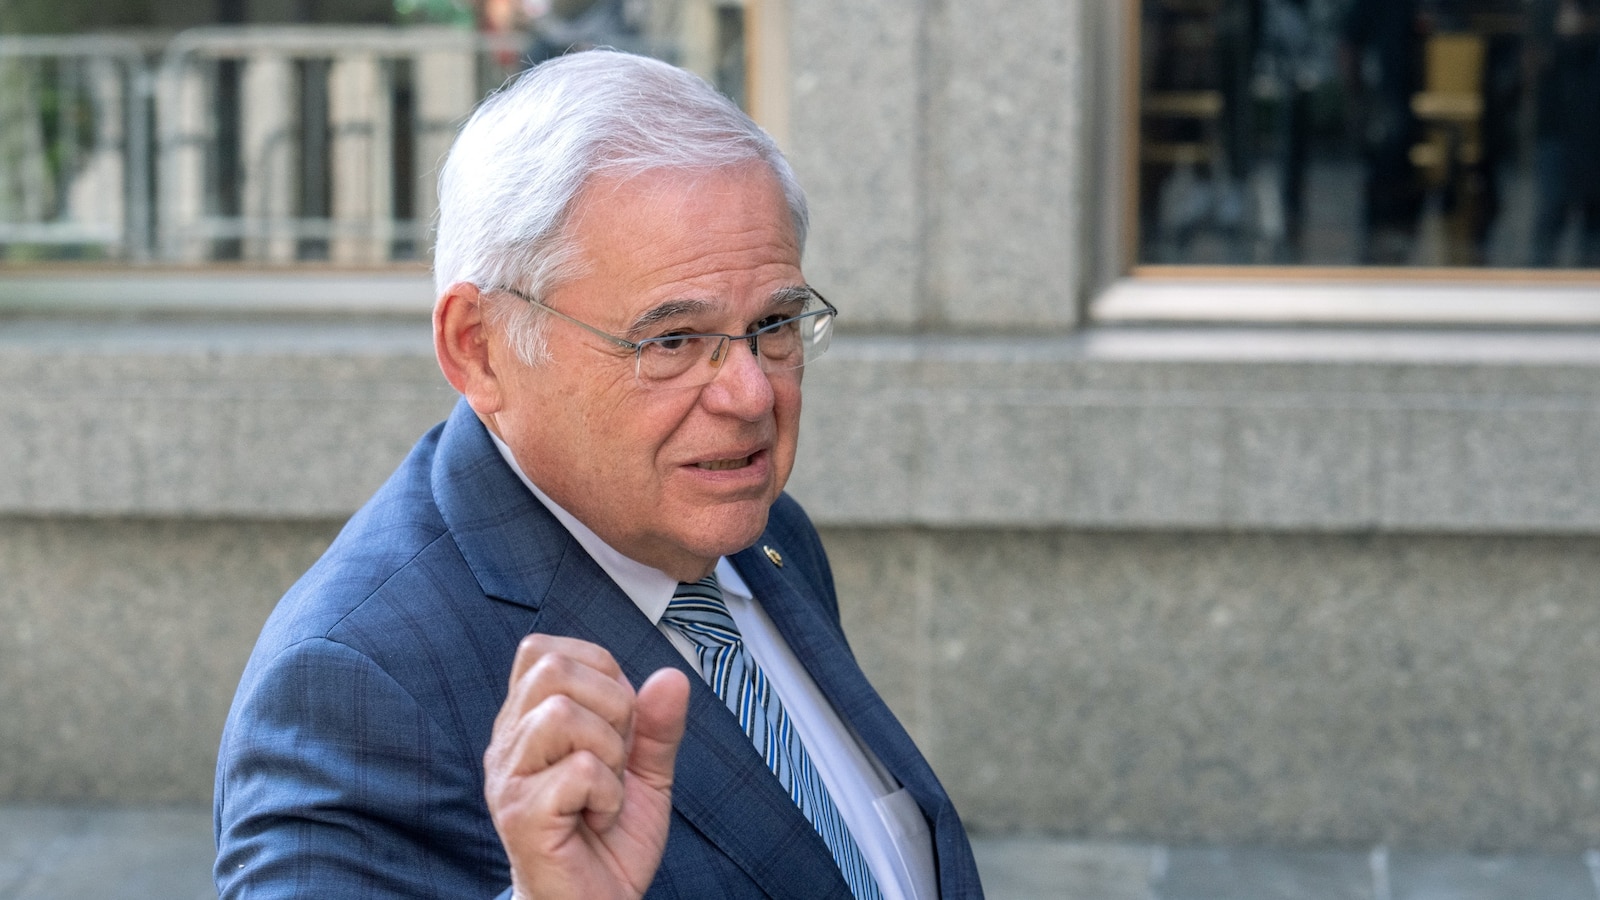 Sen. Bob Menendez 'sold the power of his office,' prosecutor claims in closing argument